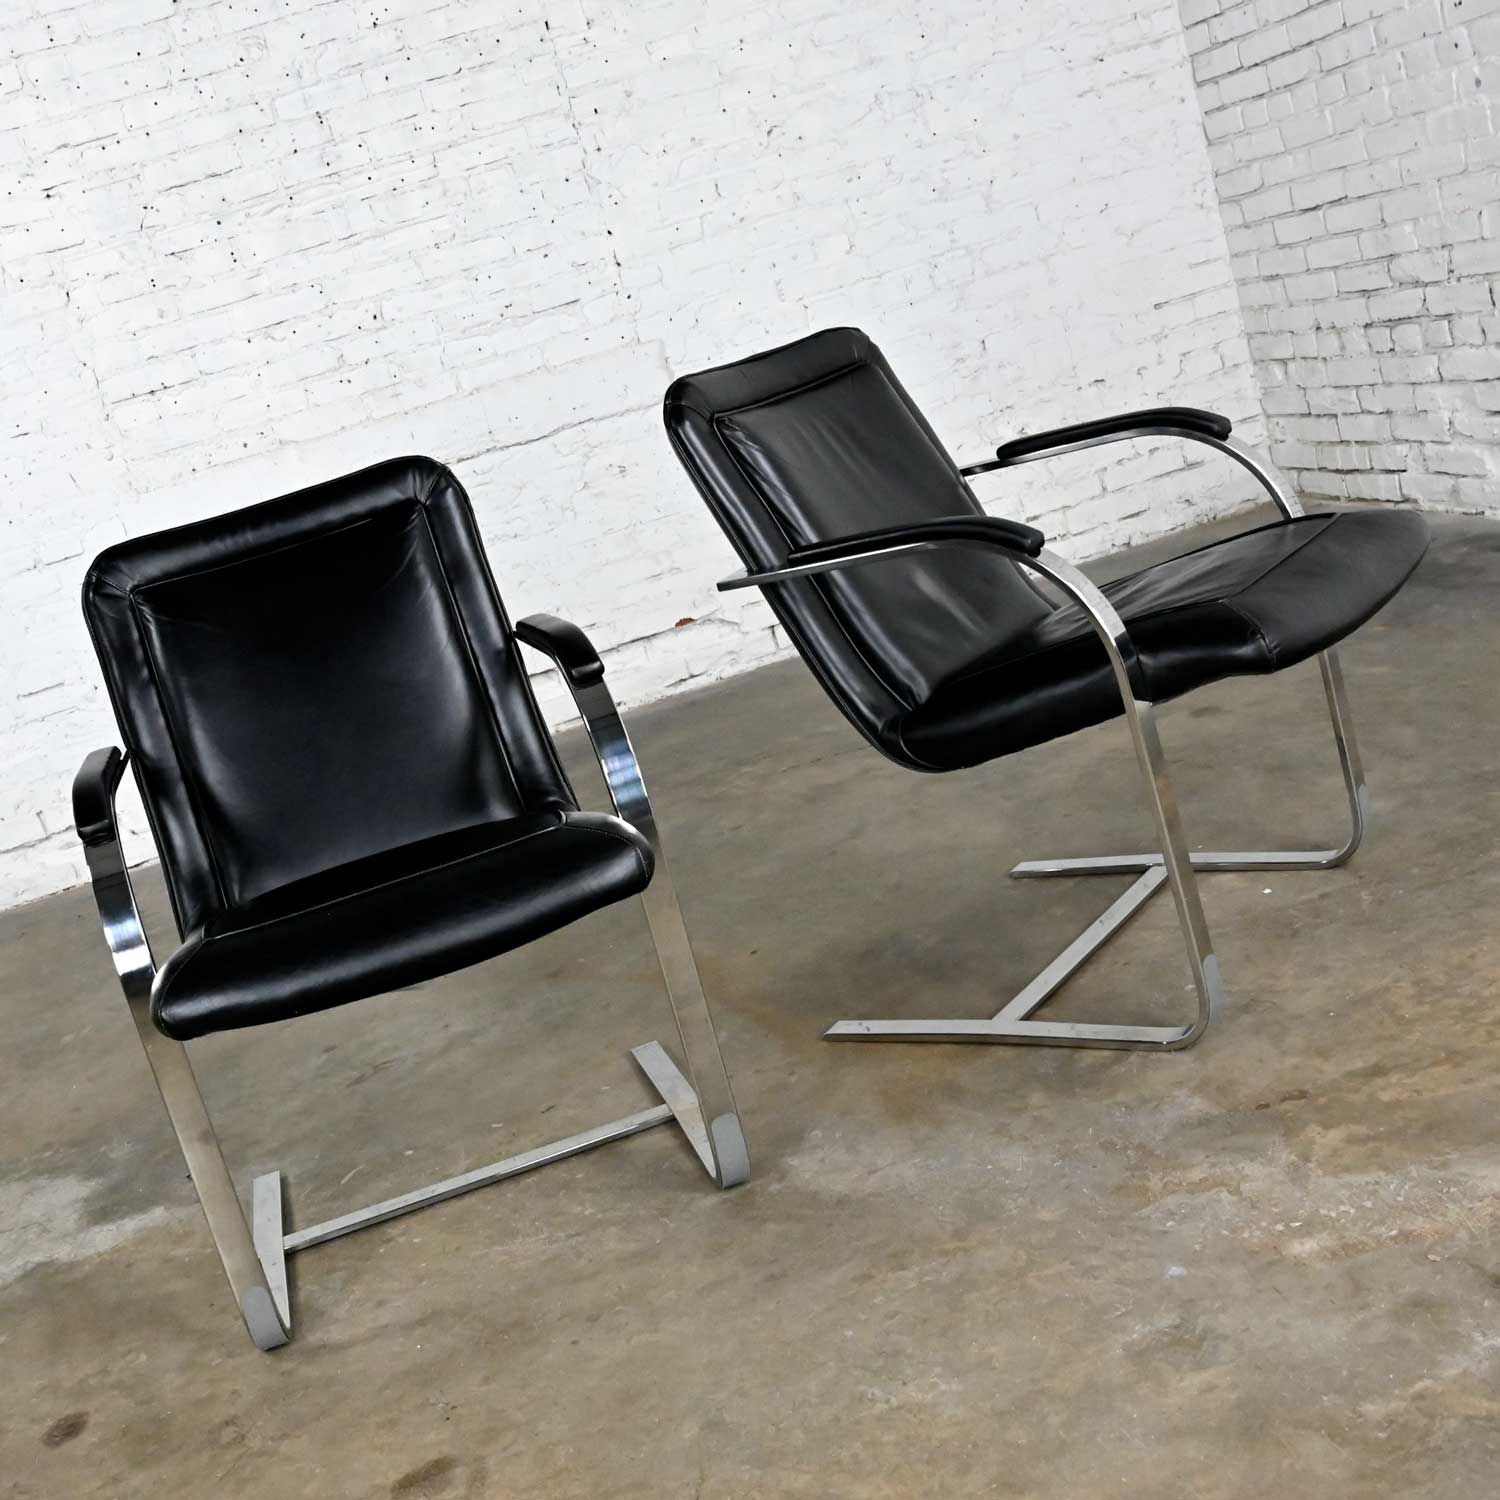 Modern St. Timothy Chair Co Cantilever Chairs Chrome Rectangular Tube & Black Leather